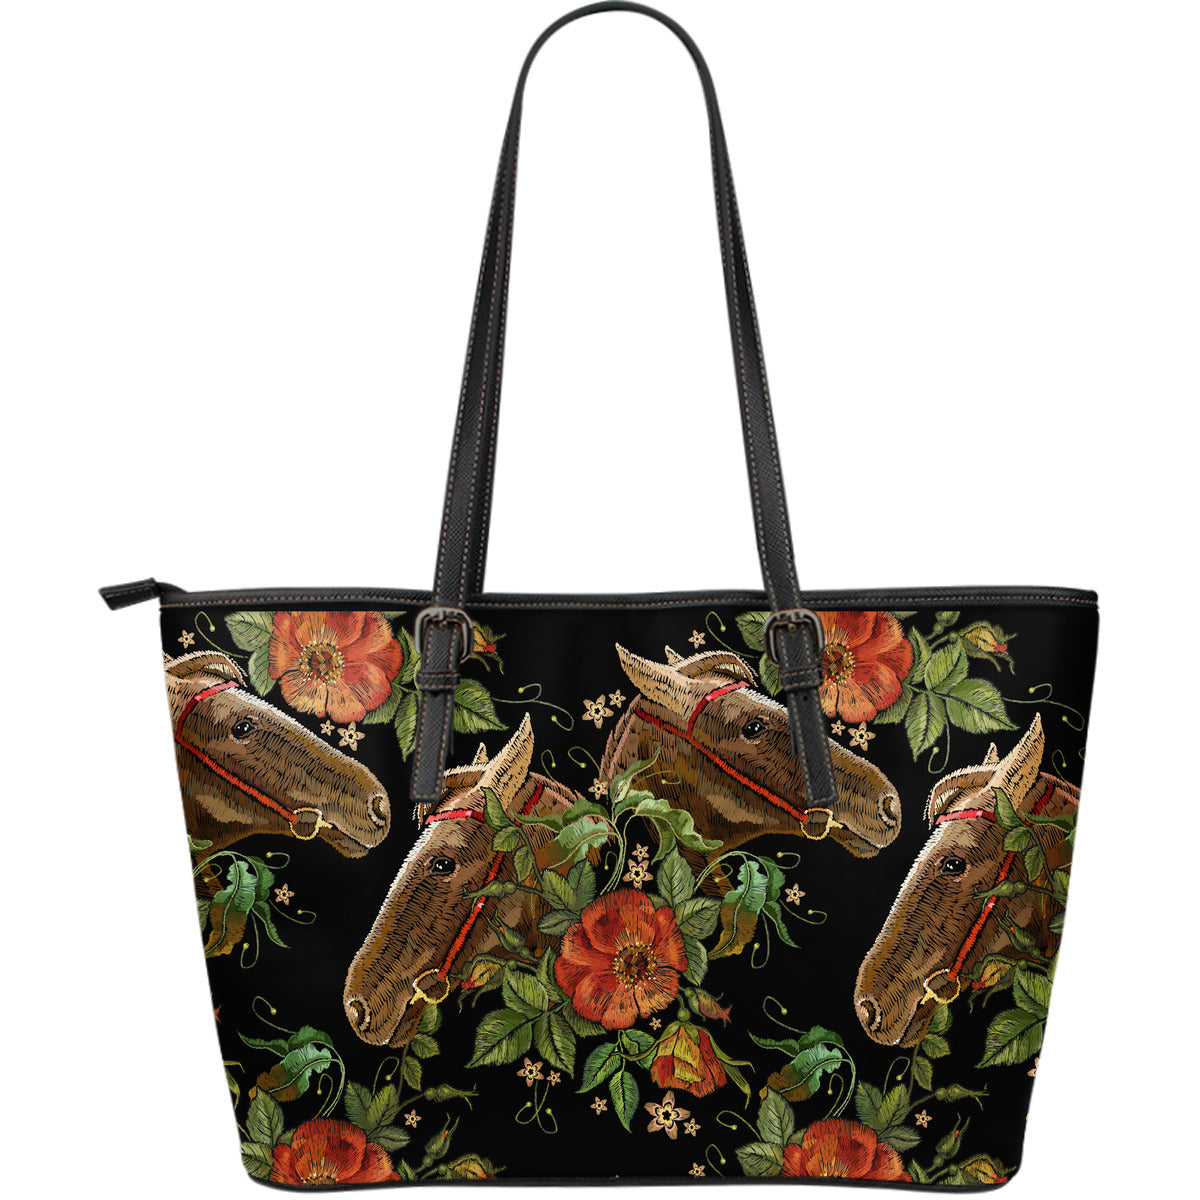 HORSE LARGE TOTE BAGS - JaZazzy 